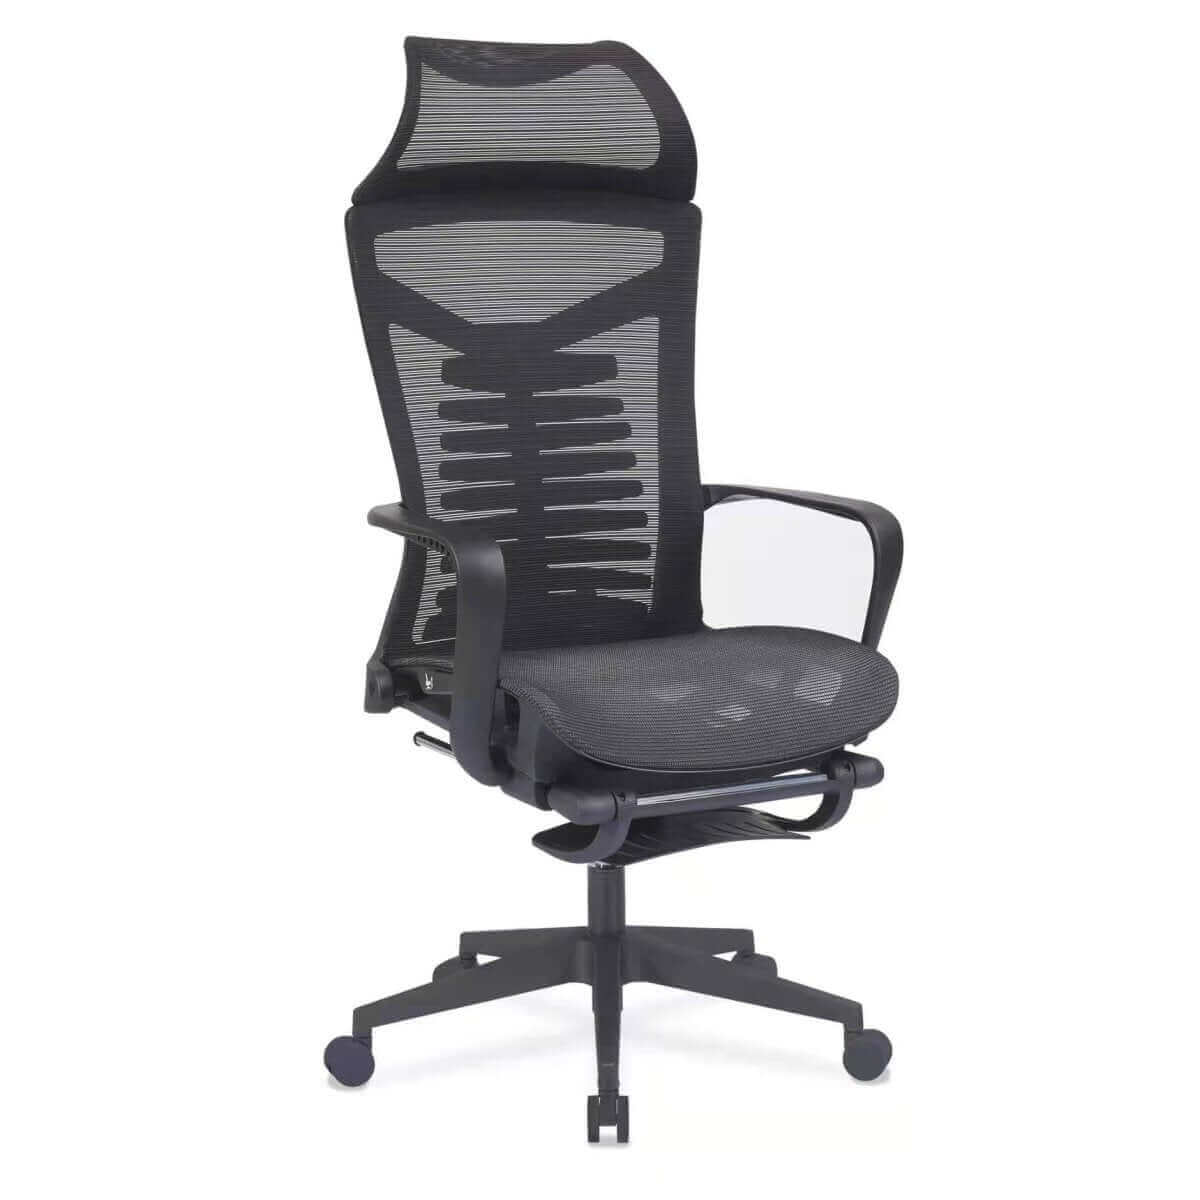 EGCX-K339L Ergonomic Office Chair Seat Adjustable Height Deluxe Mesh Chair Back Support Footrest-Upinteriors